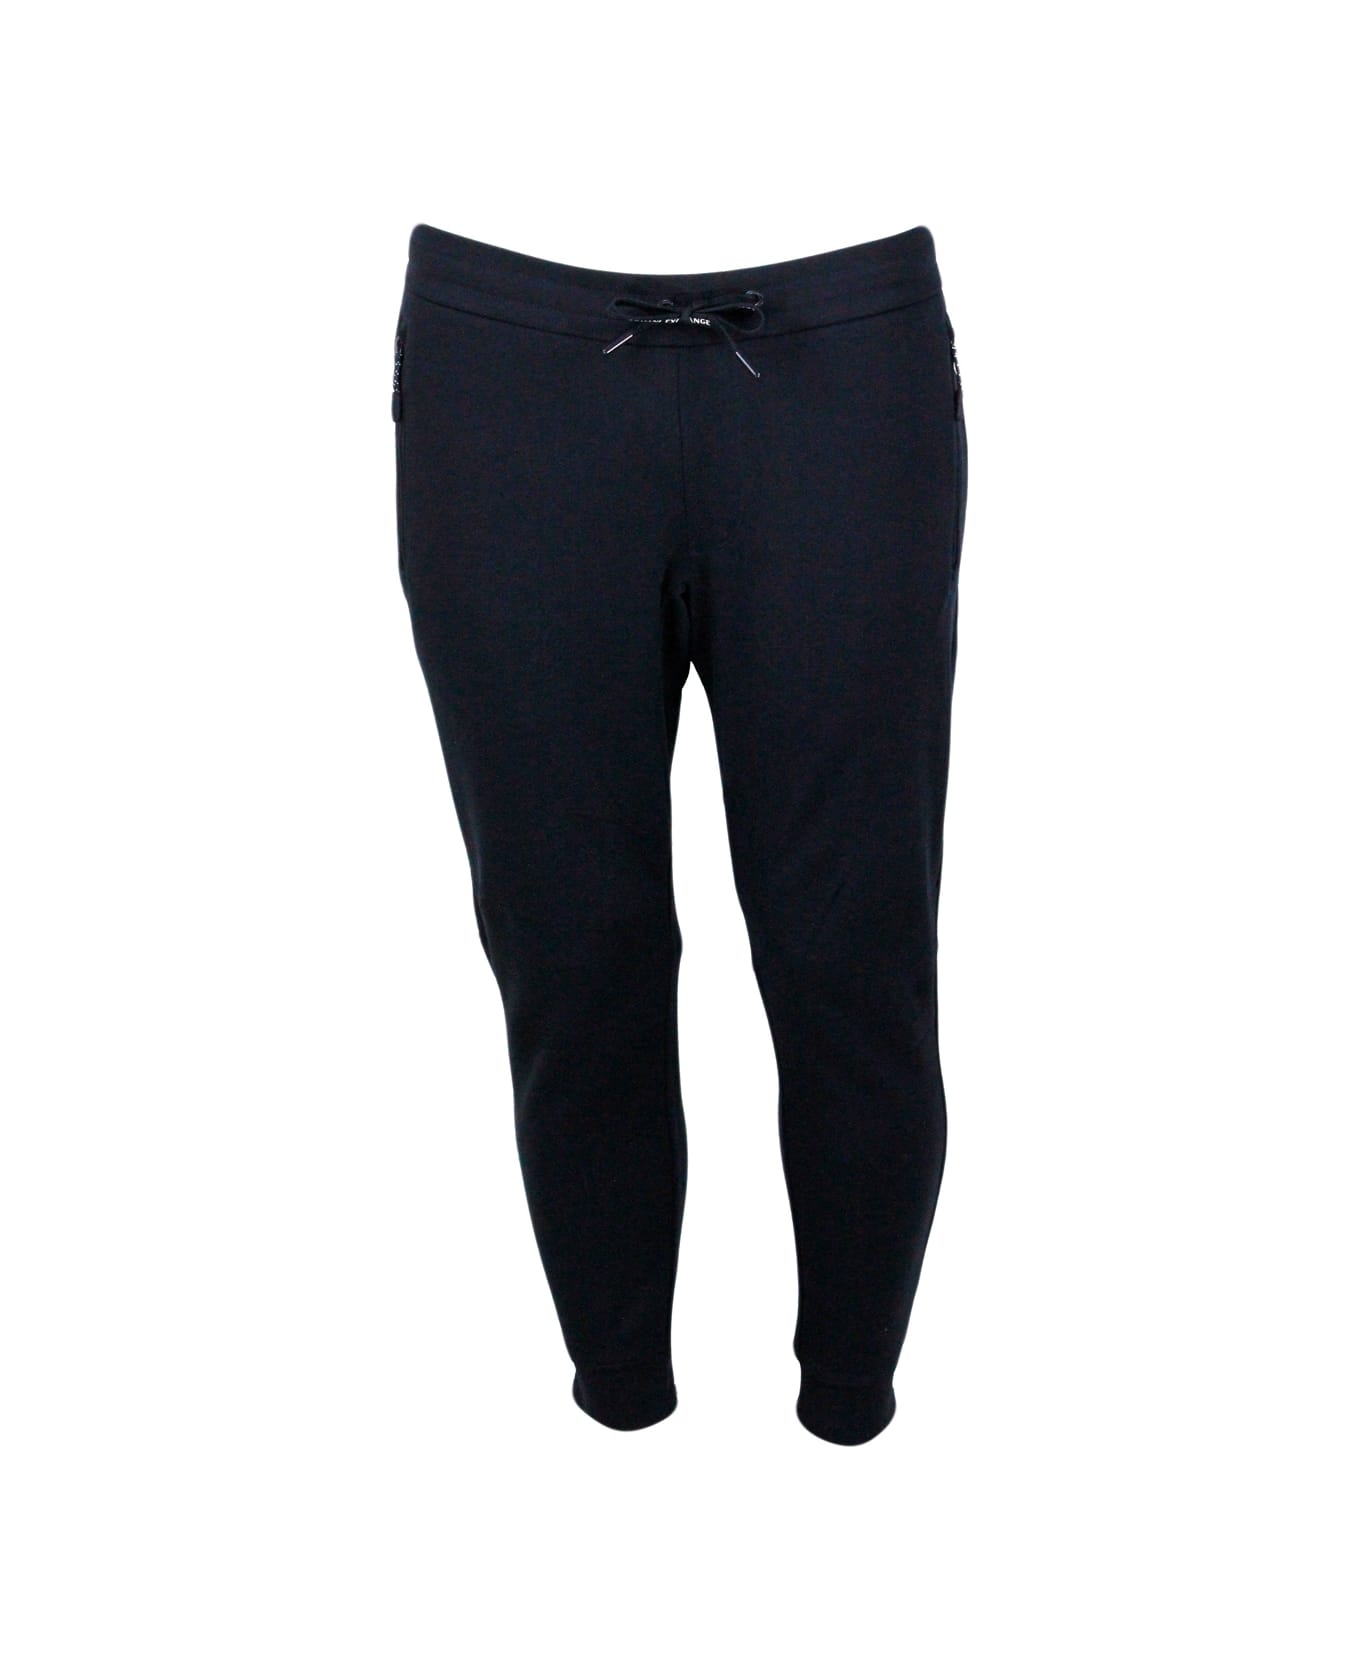 Armani Collezioni Cotton Fleece Jogging Trousers With Drawstring At The Waist And Cuff At The Bottom - Blu